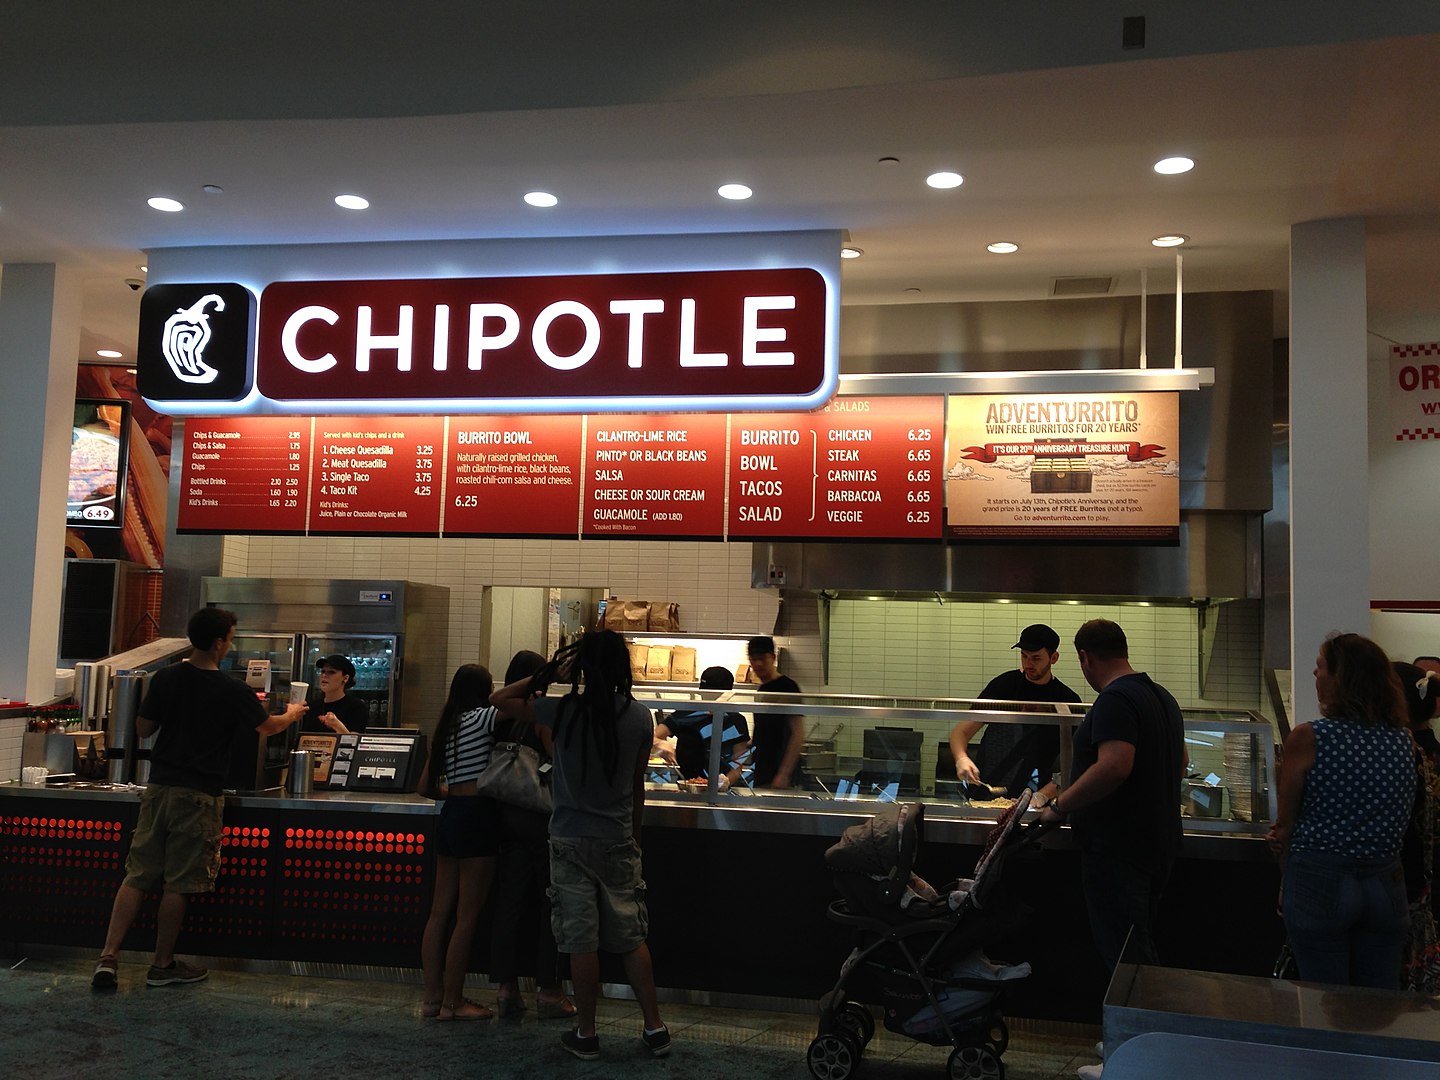 Chipotle Work Schedule Class Action Lawsuit Illegal Working Hours?